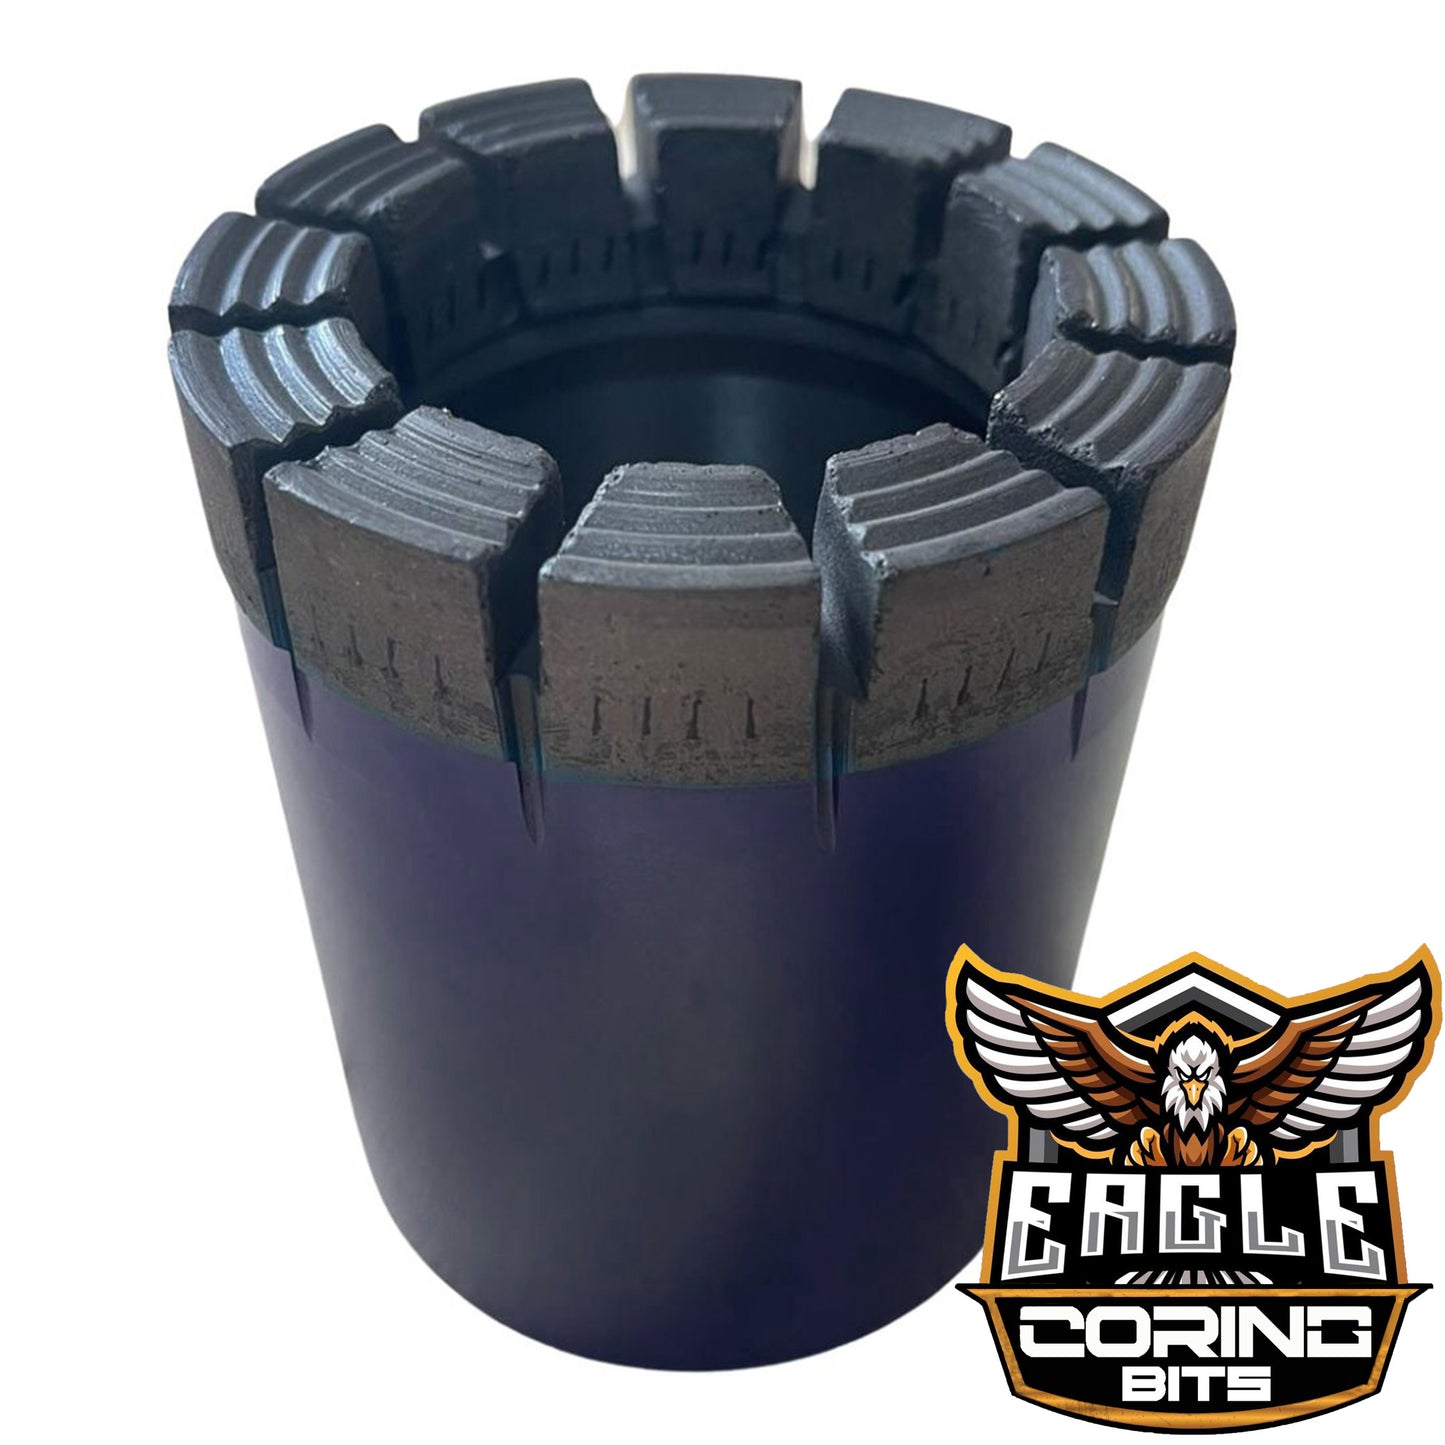 Eagle 8 - HWL3 Core Drill Bit - Set to Liner